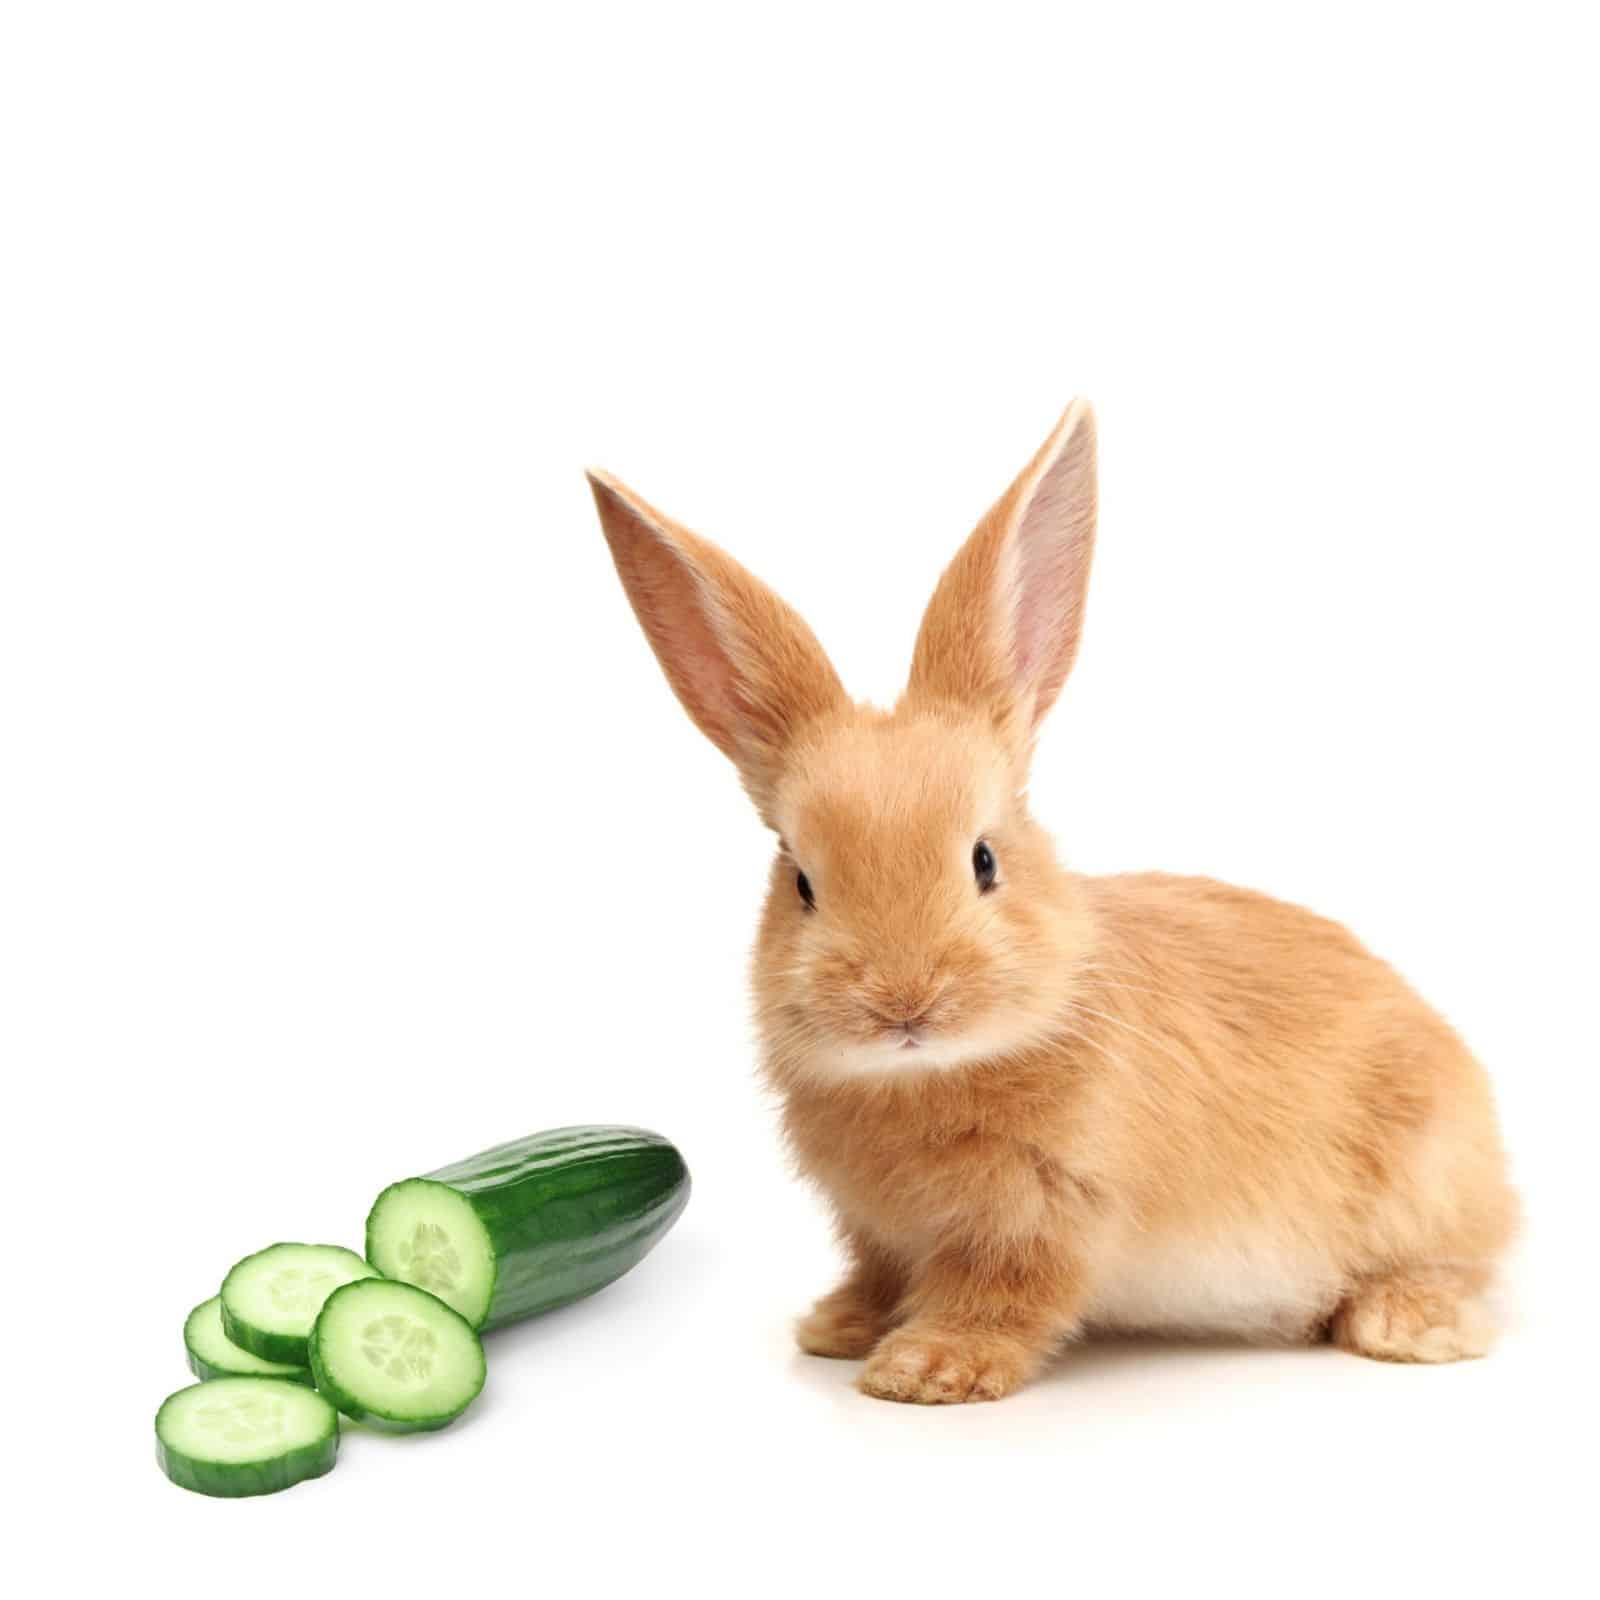 Can rabbits eat cucumbers